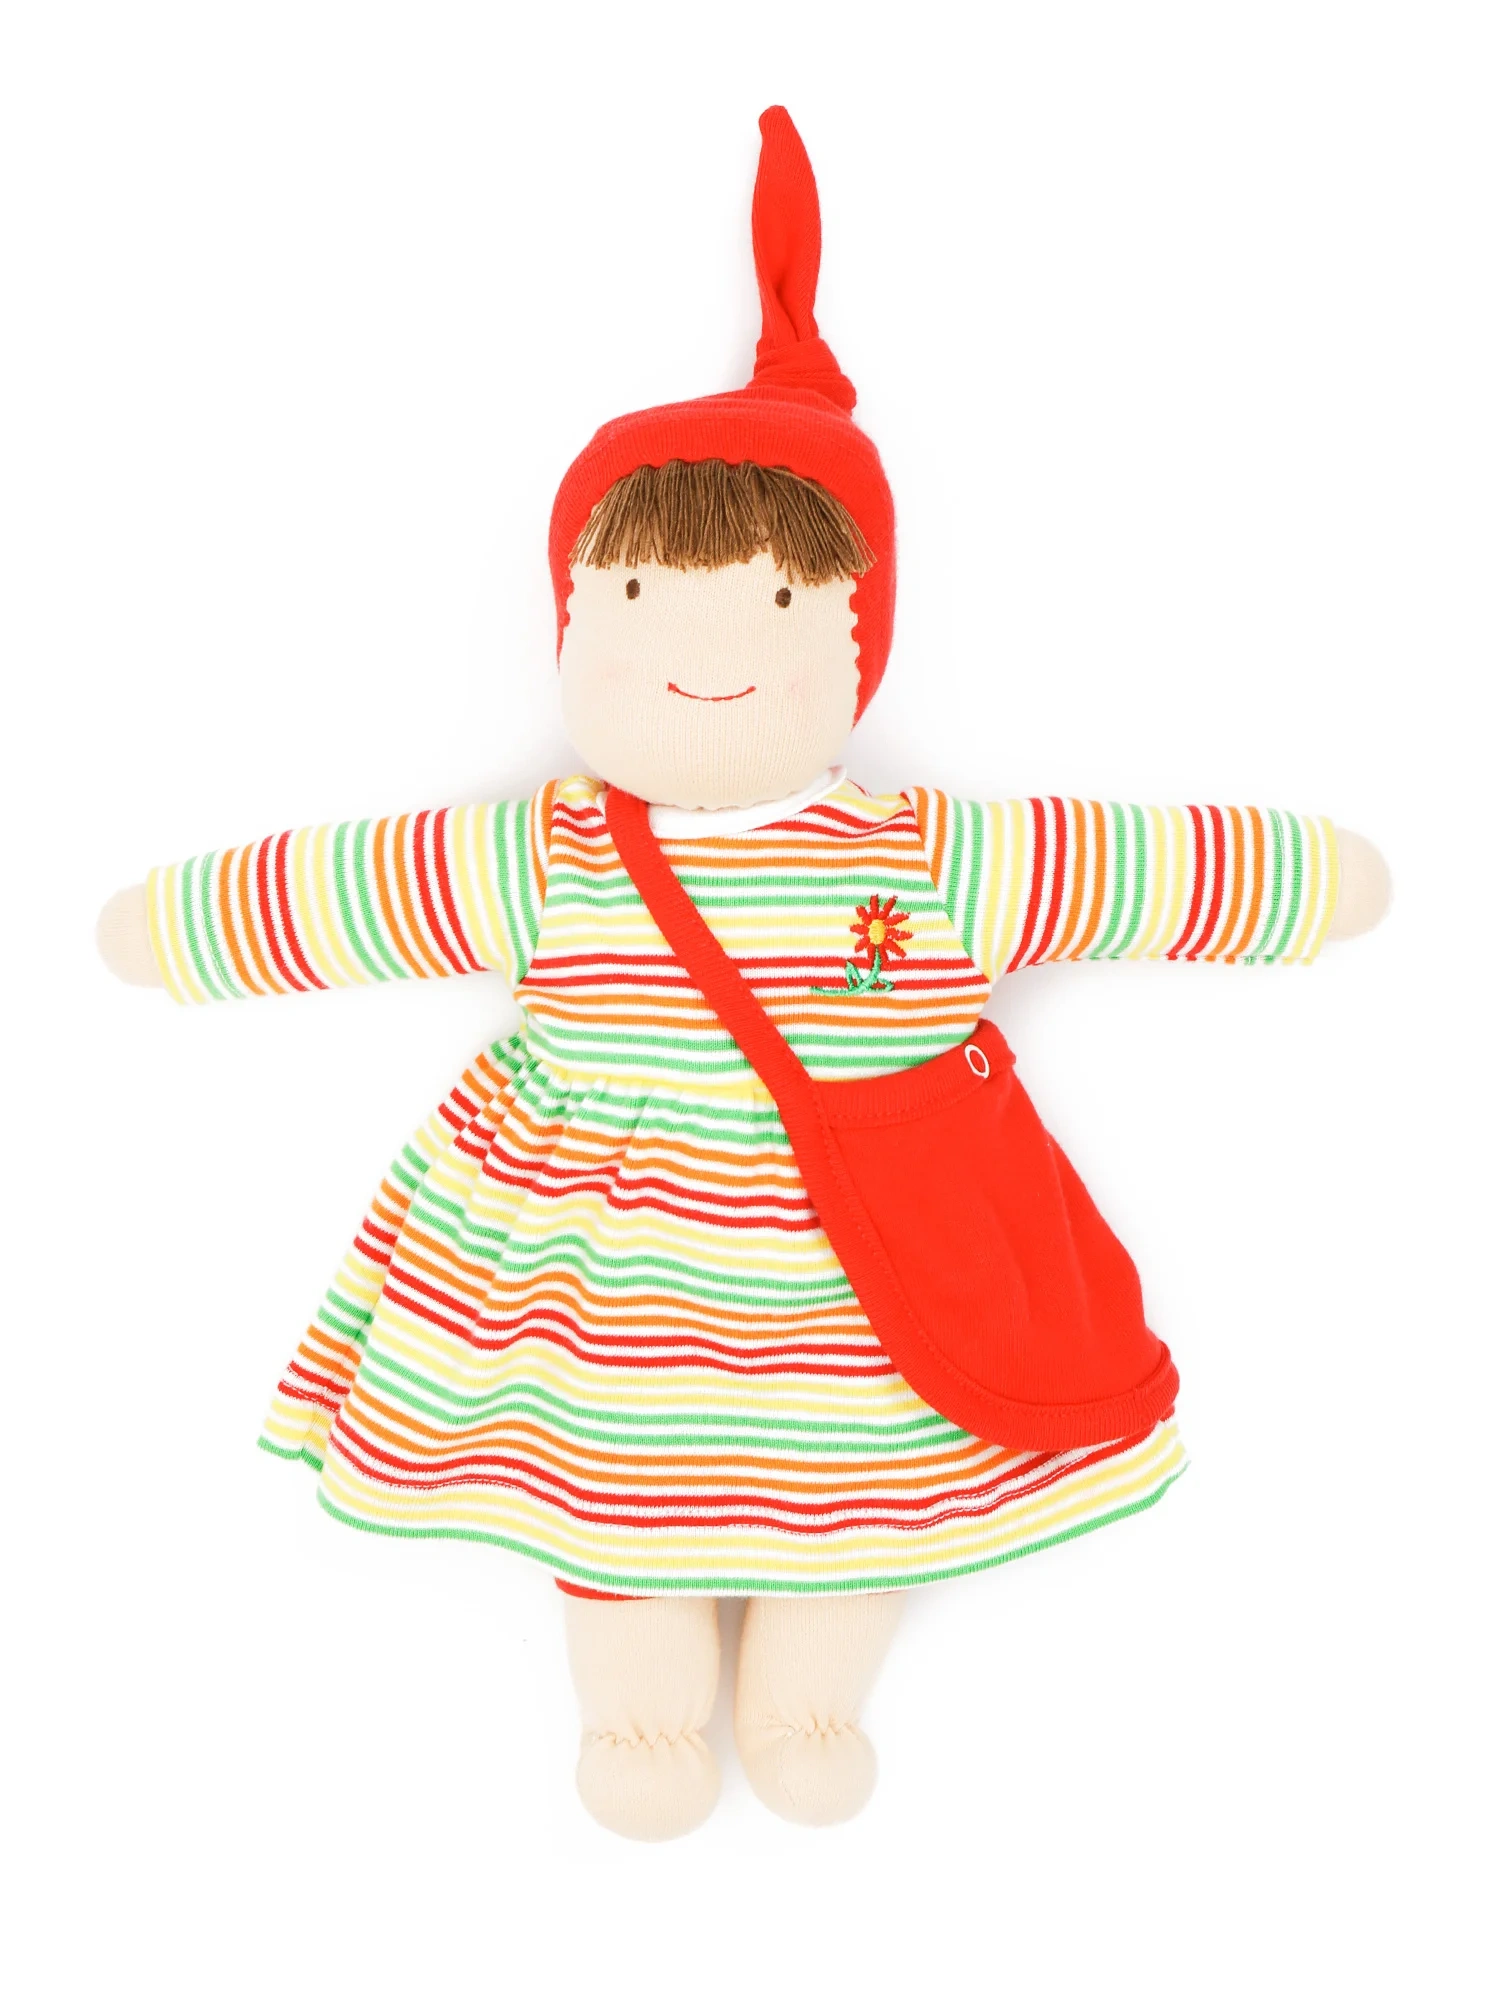 Under The Nile Organic Cotton Waldorf Inspired Jill Dress Up Doll - Multicolor Stripe